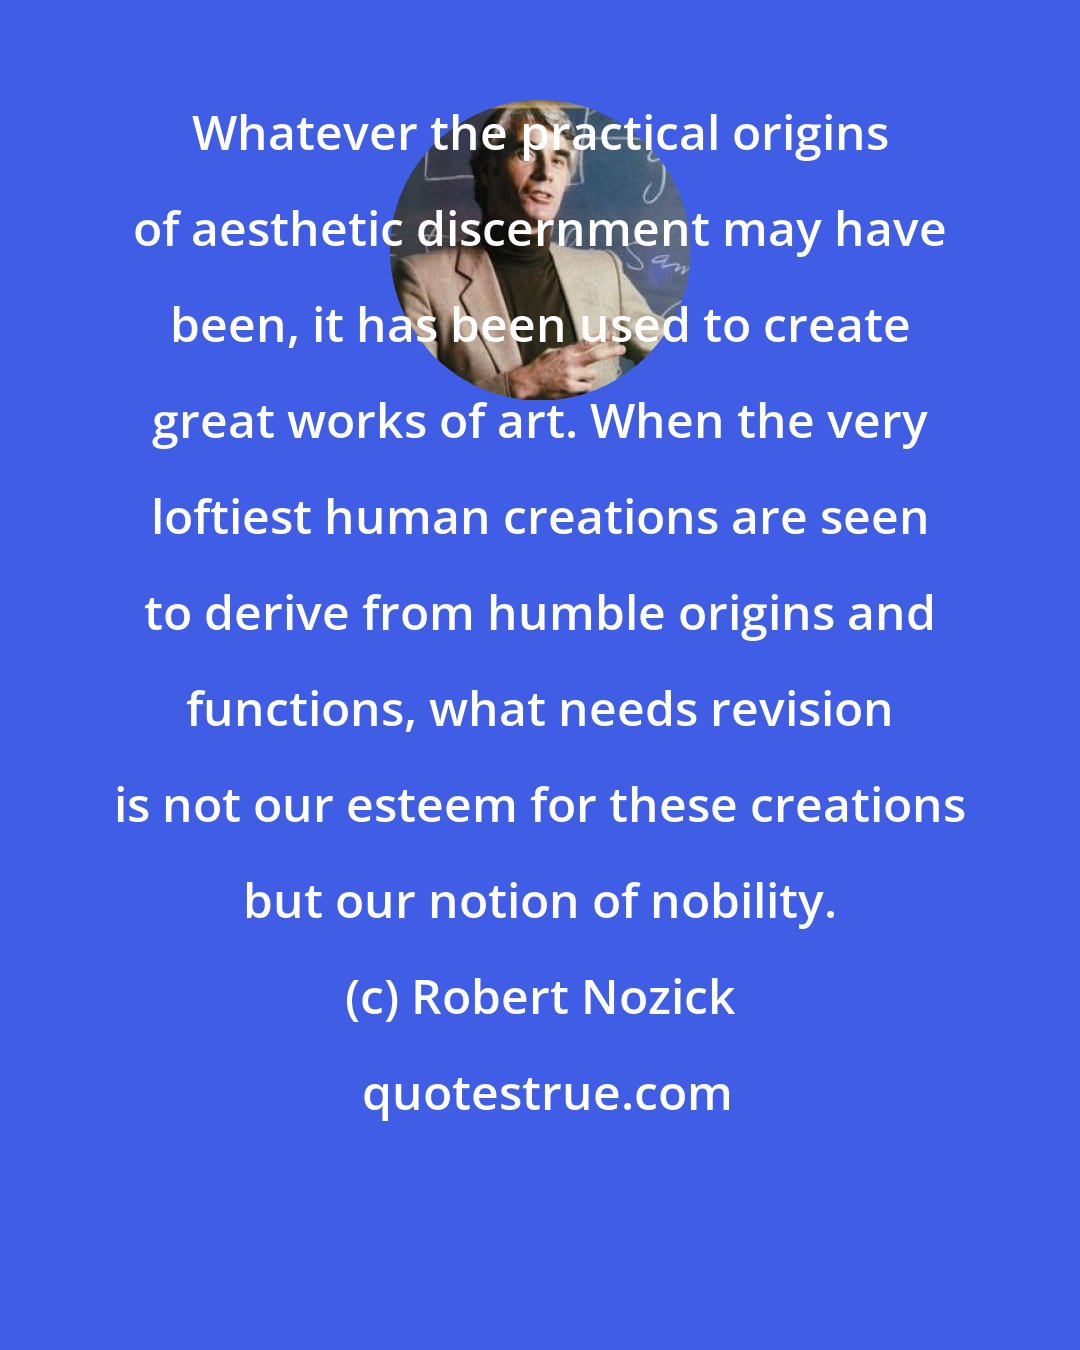 Robert Nozick: Whatever the practical origins of aesthetic discernment may have been, it has been used to create great works of art. When the very loftiest human creations are seen to derive from humble origins and functions, what needs revision is not our esteem for these creations but our notion of nobility.